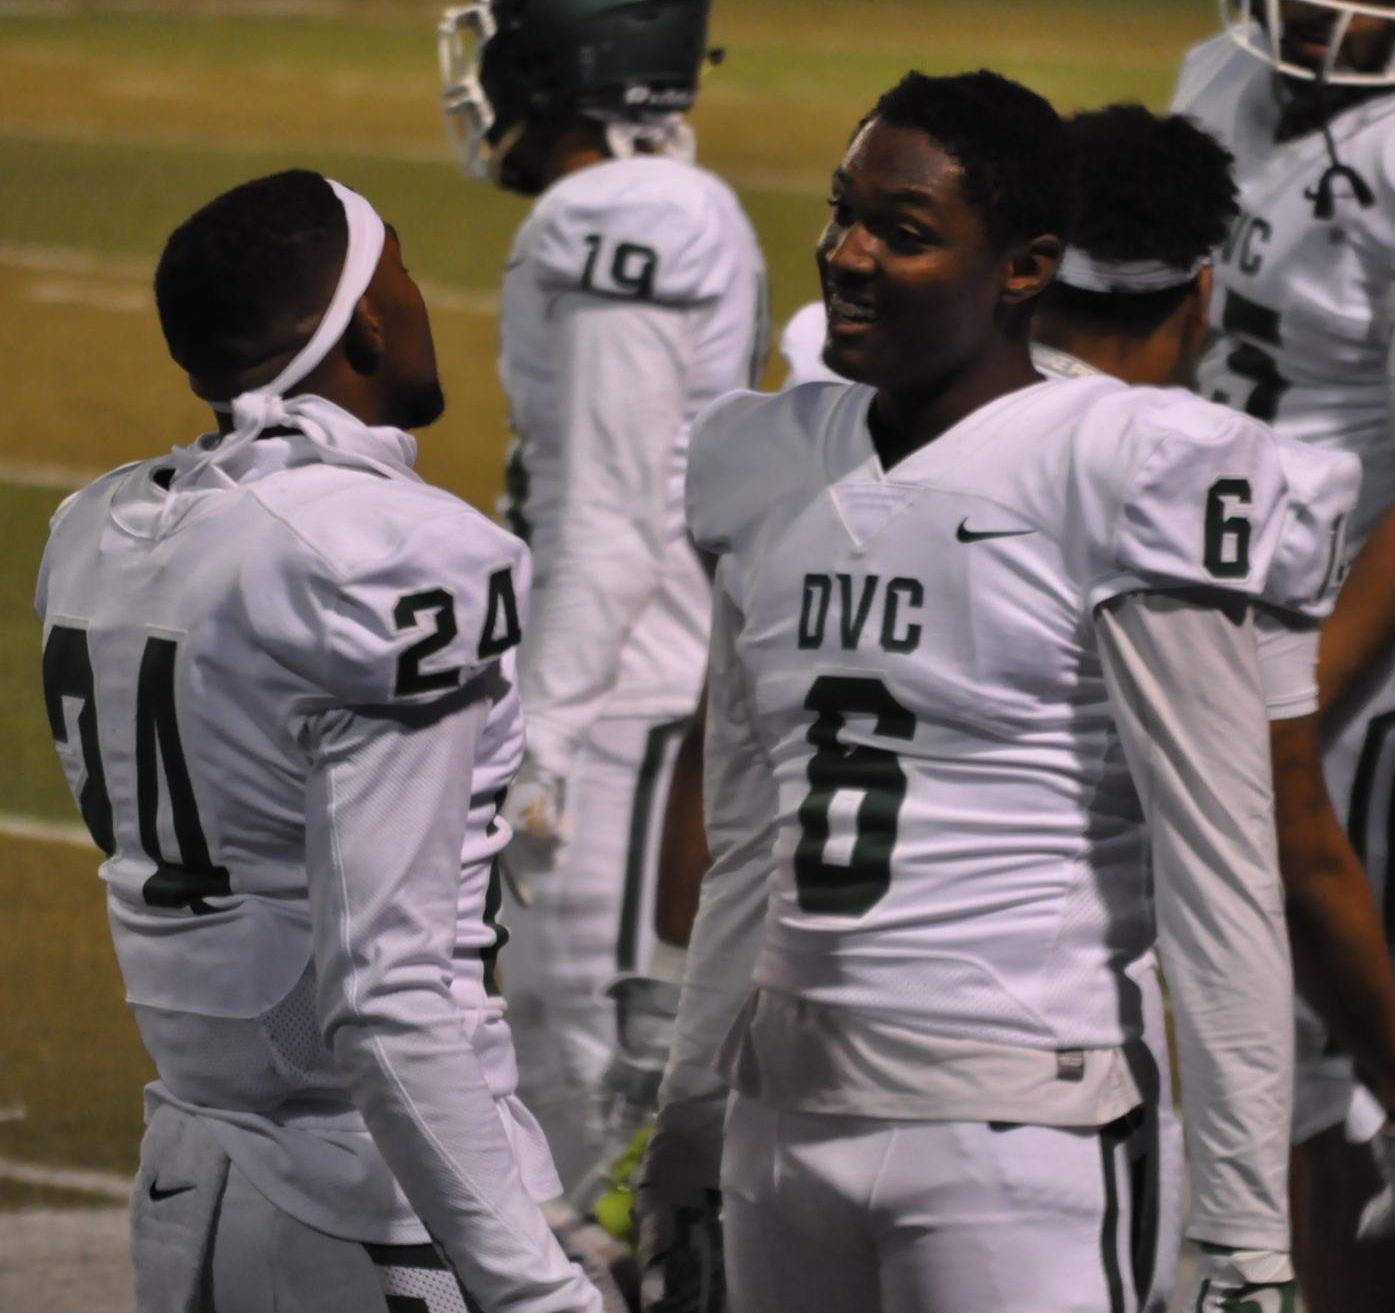 Cory Cox (6) celebrates with fellow defensive back, Isaiah Creal-Musgray (24), after Cox's second interception of the night returned for a touchdown in a game against Contra Costa College on November 4, 2017 in San Pablo, California. | Photo by Aaron Tolentino